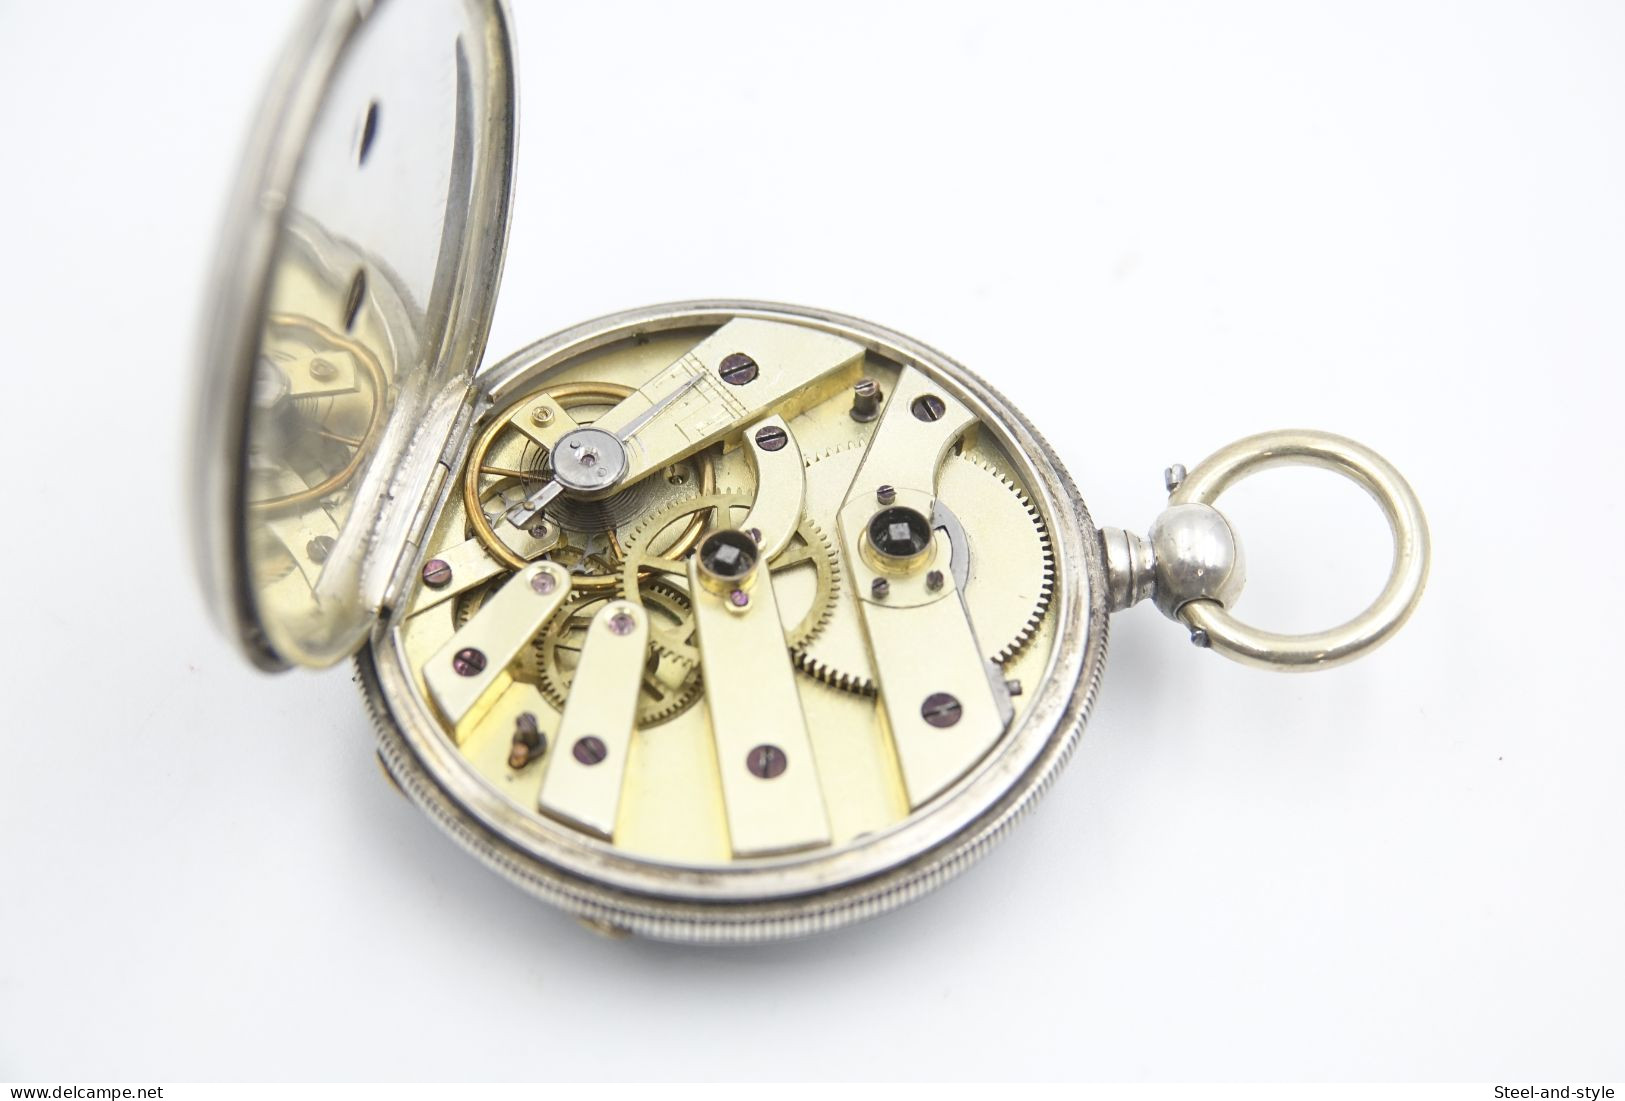 Watches : POCKET WATCH SOLID SILVER Key Winding Wide Dial Open Face 1880-900's - Original - Running - Orologi Da Polso